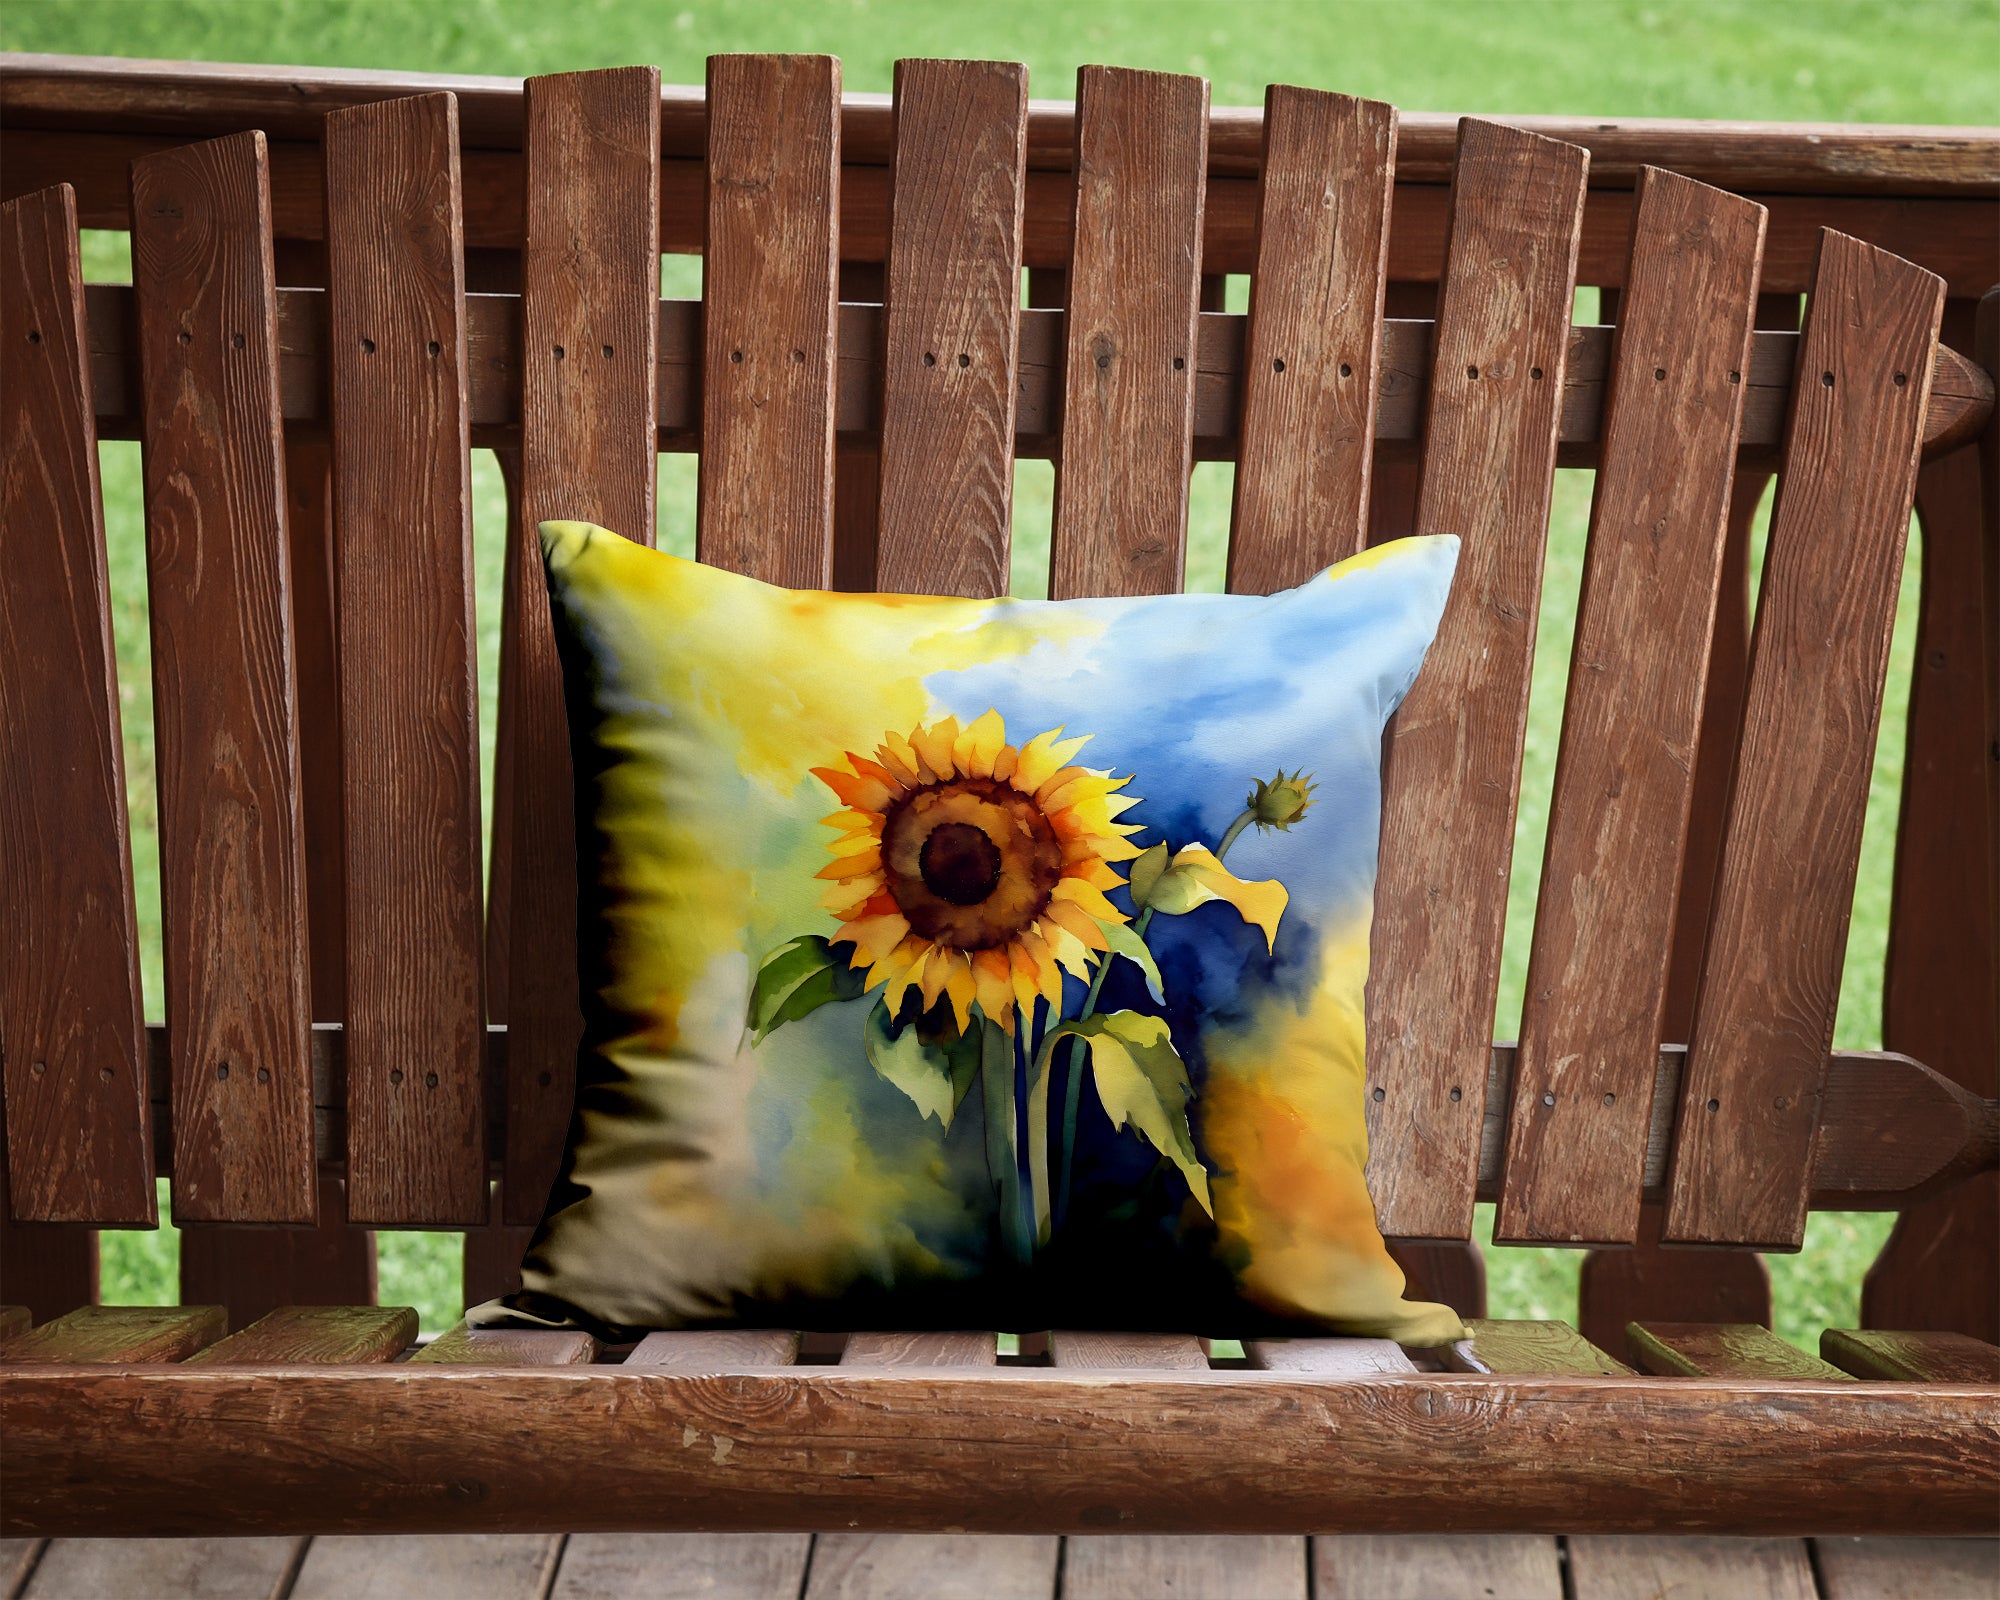 Buy this Sunflowers in Watercolor Throw Pillow